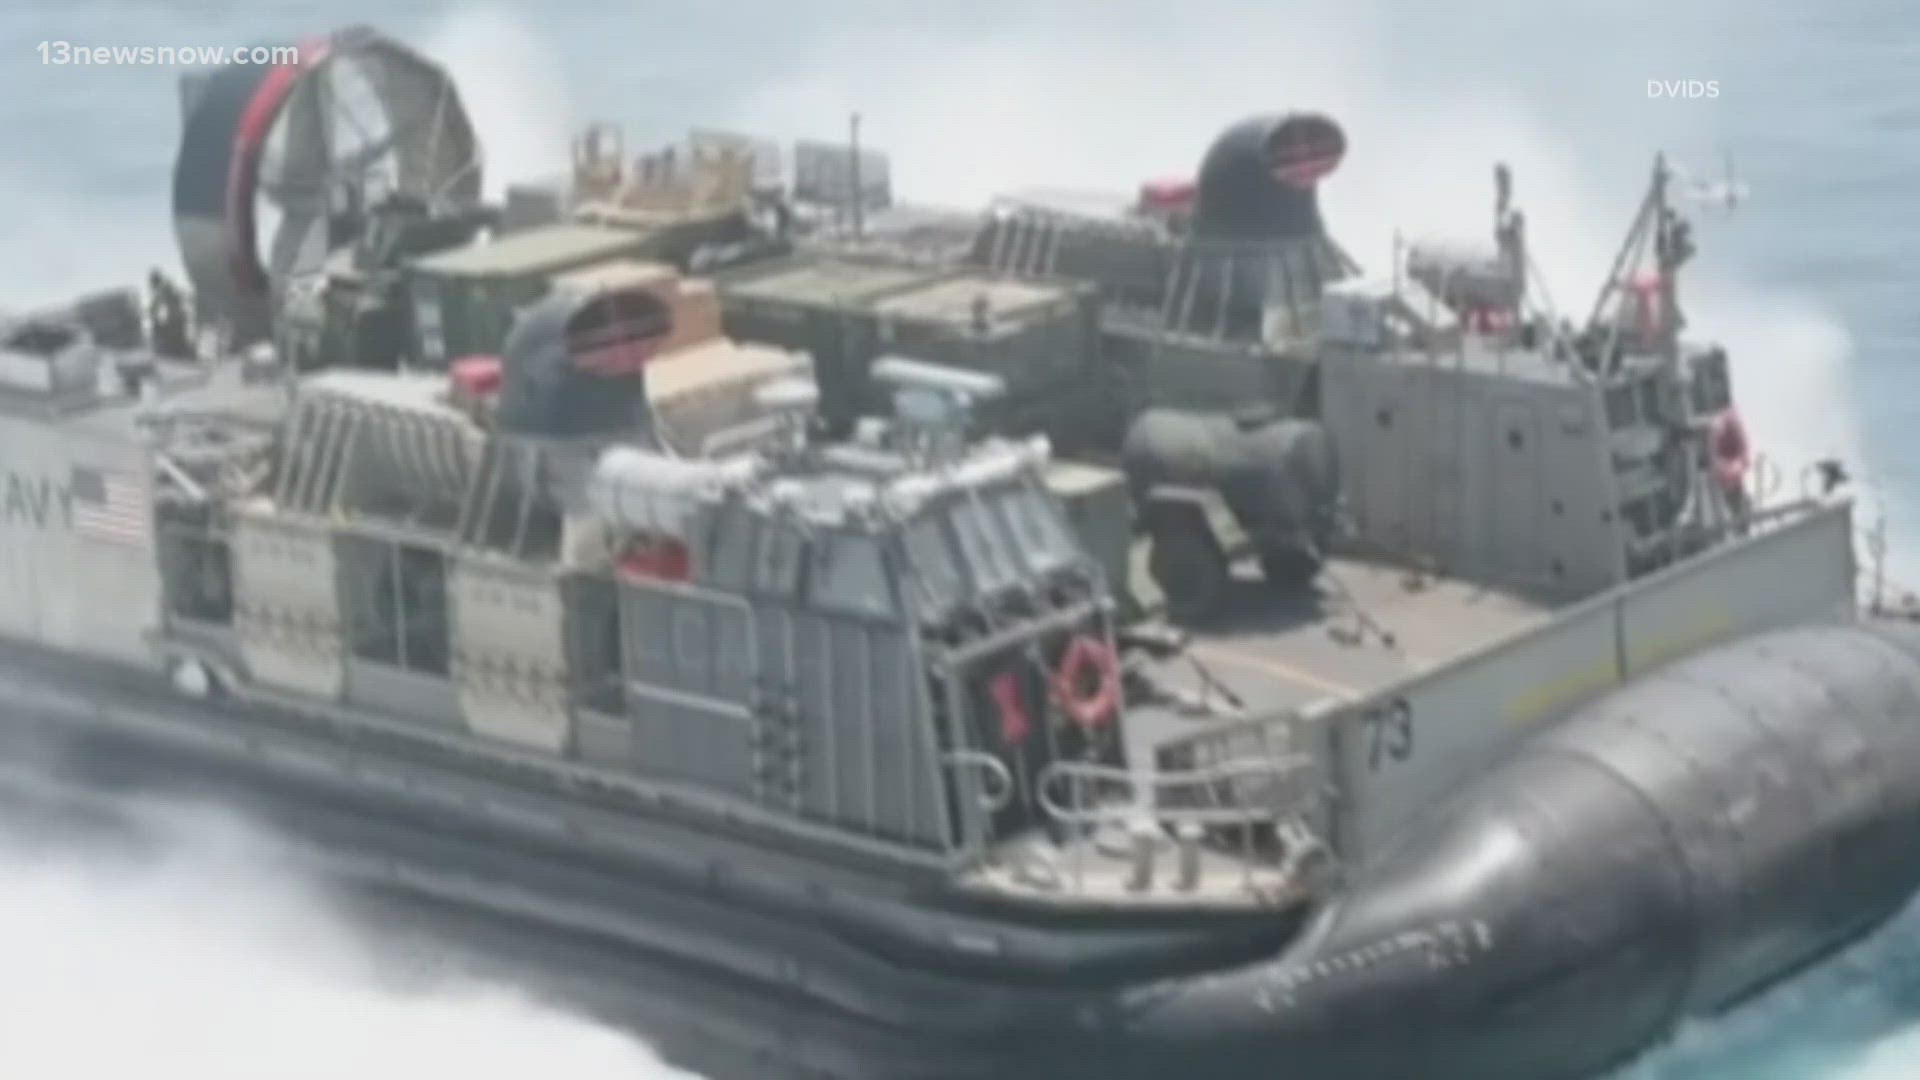 A total of 35 Sailors and Marines were injured after two hovercrafts were involved in an incident.